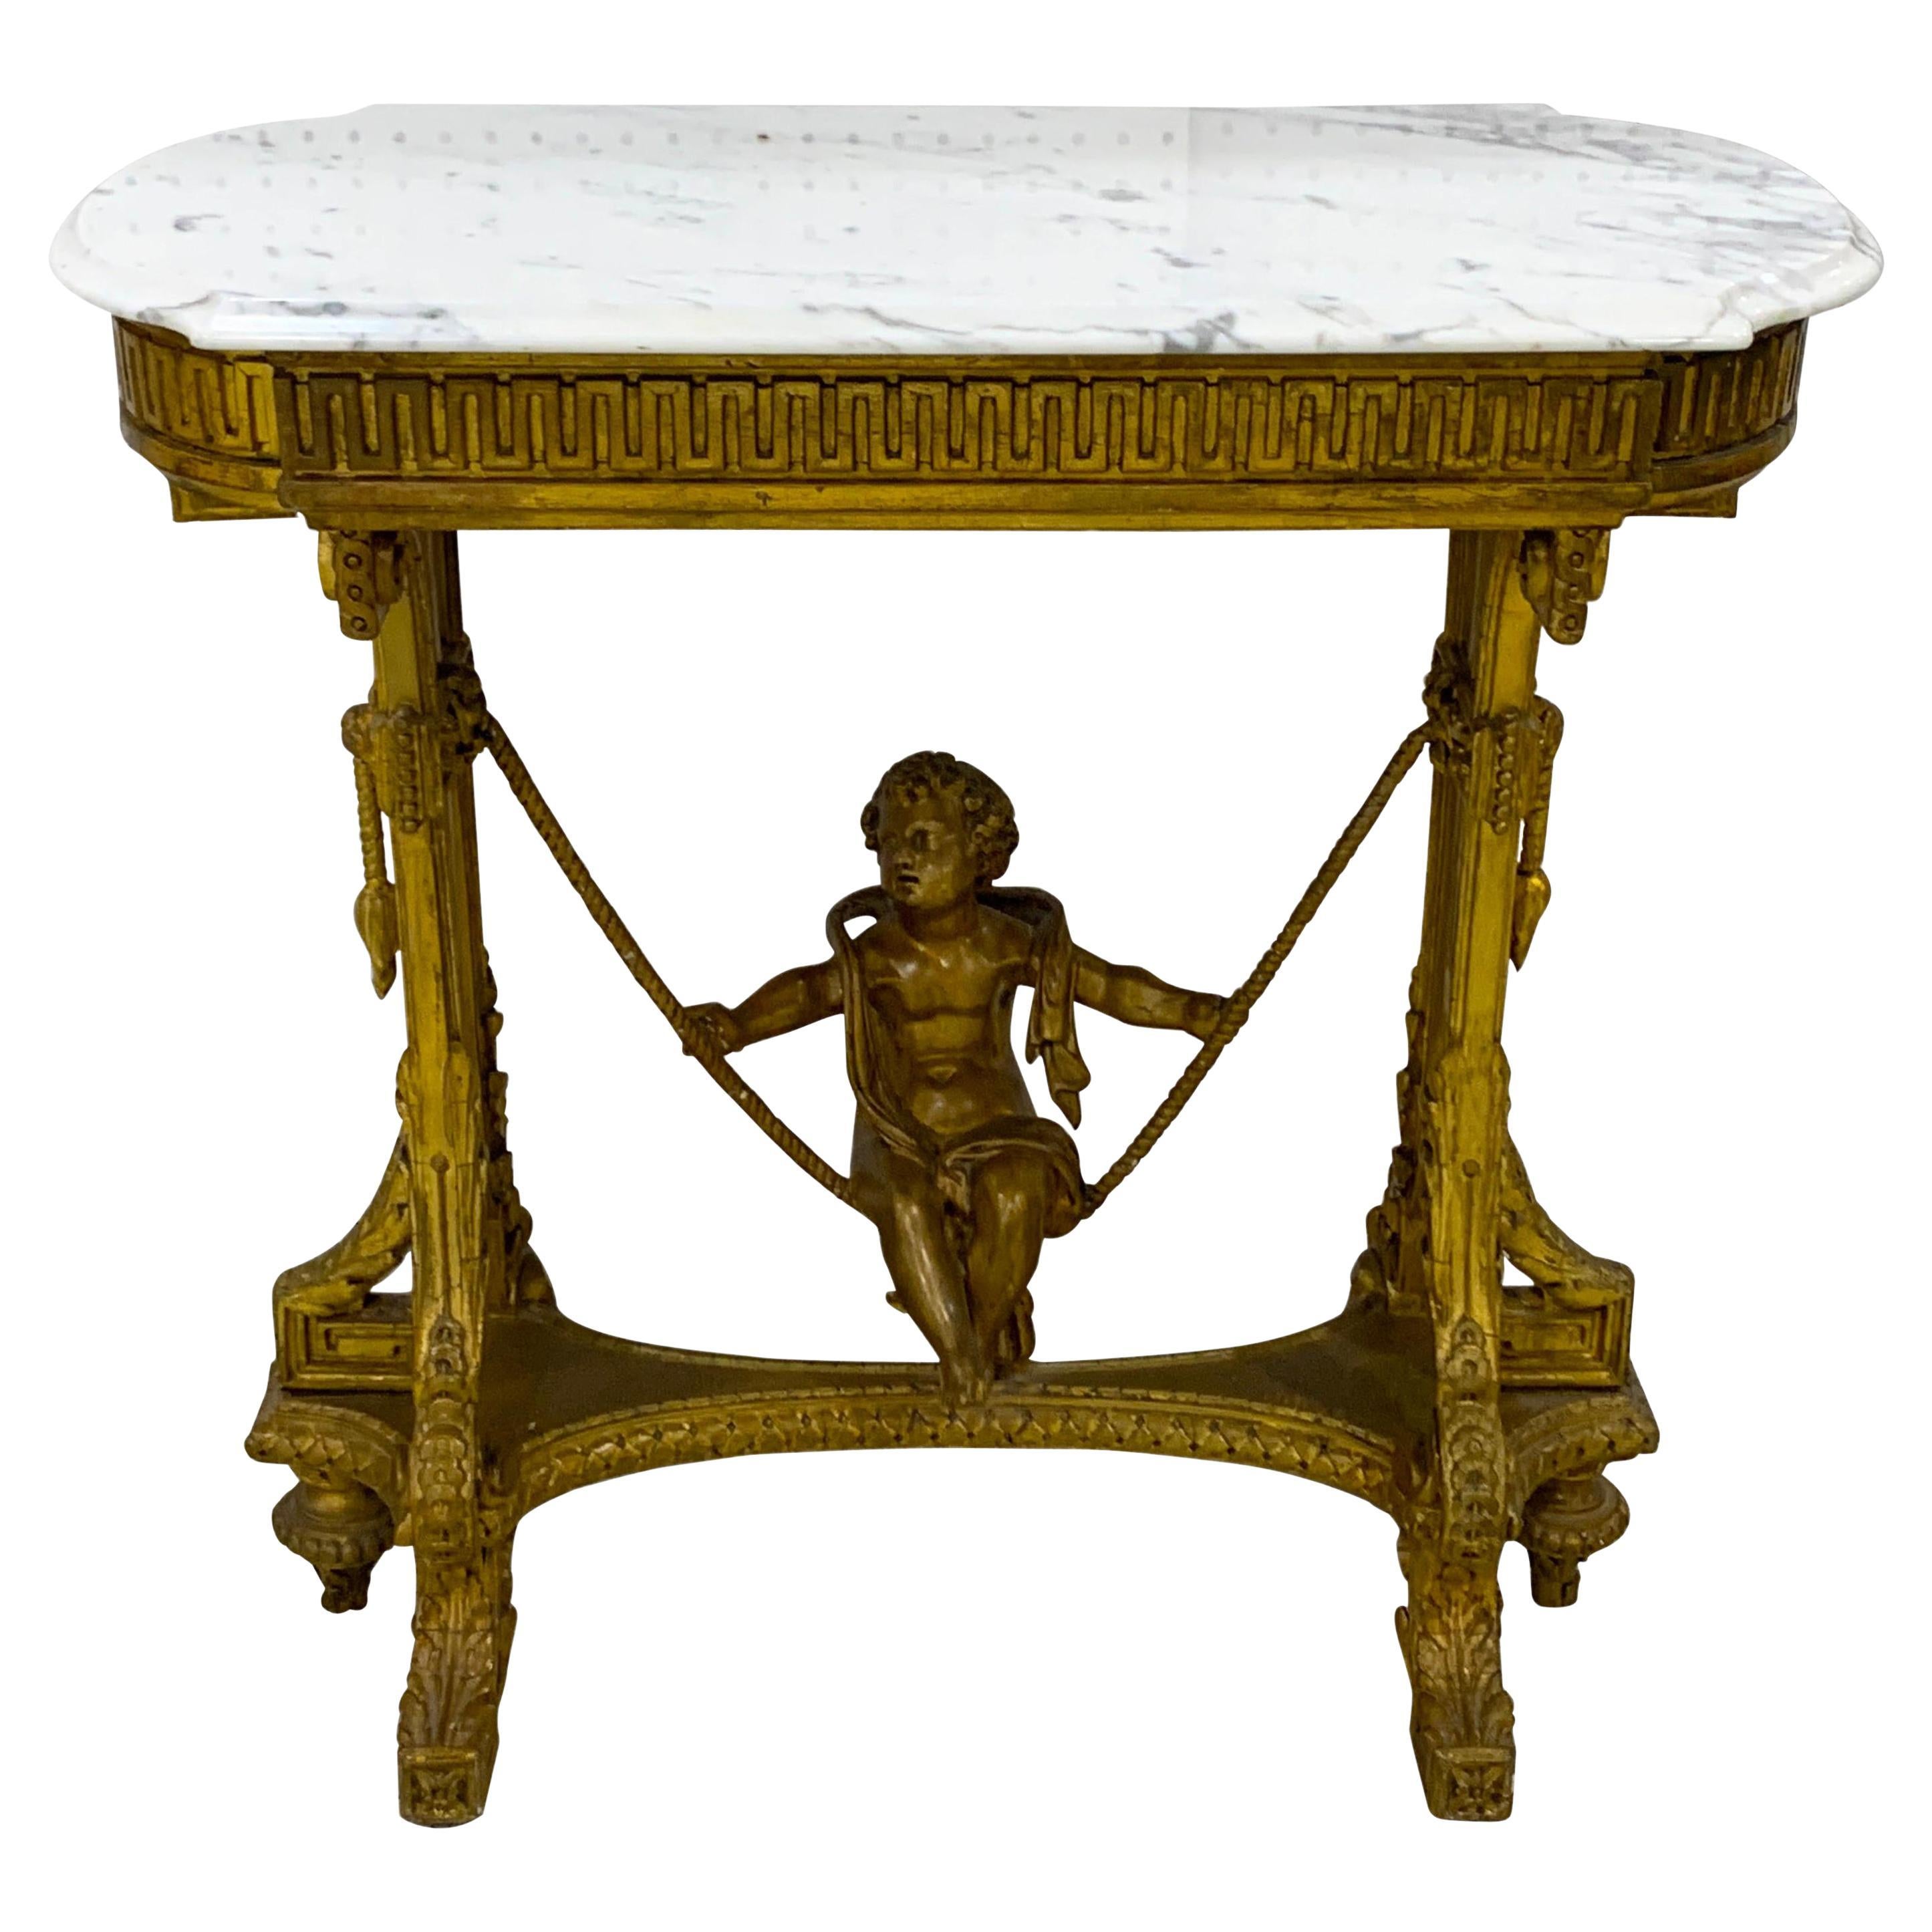 Exquisite French Giltwood Swinging Putto Marble Top Table/ Ferner